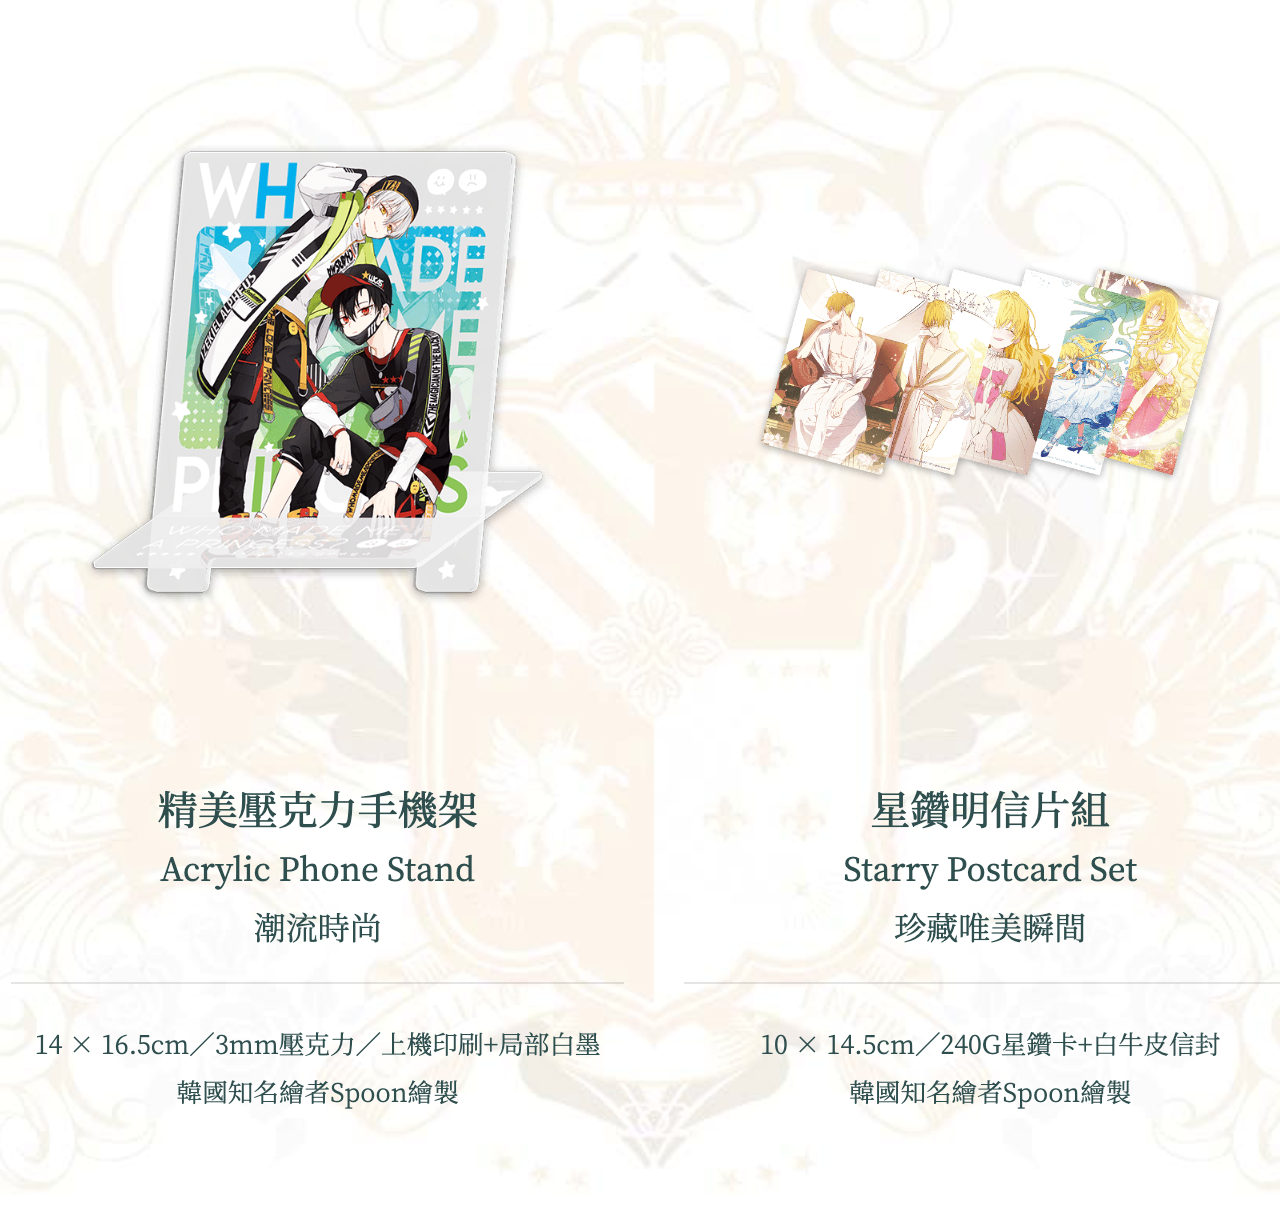 [Taiwan version] Who Made Me a Princess Vol.1+2 COMIC SPECIAL EDITION